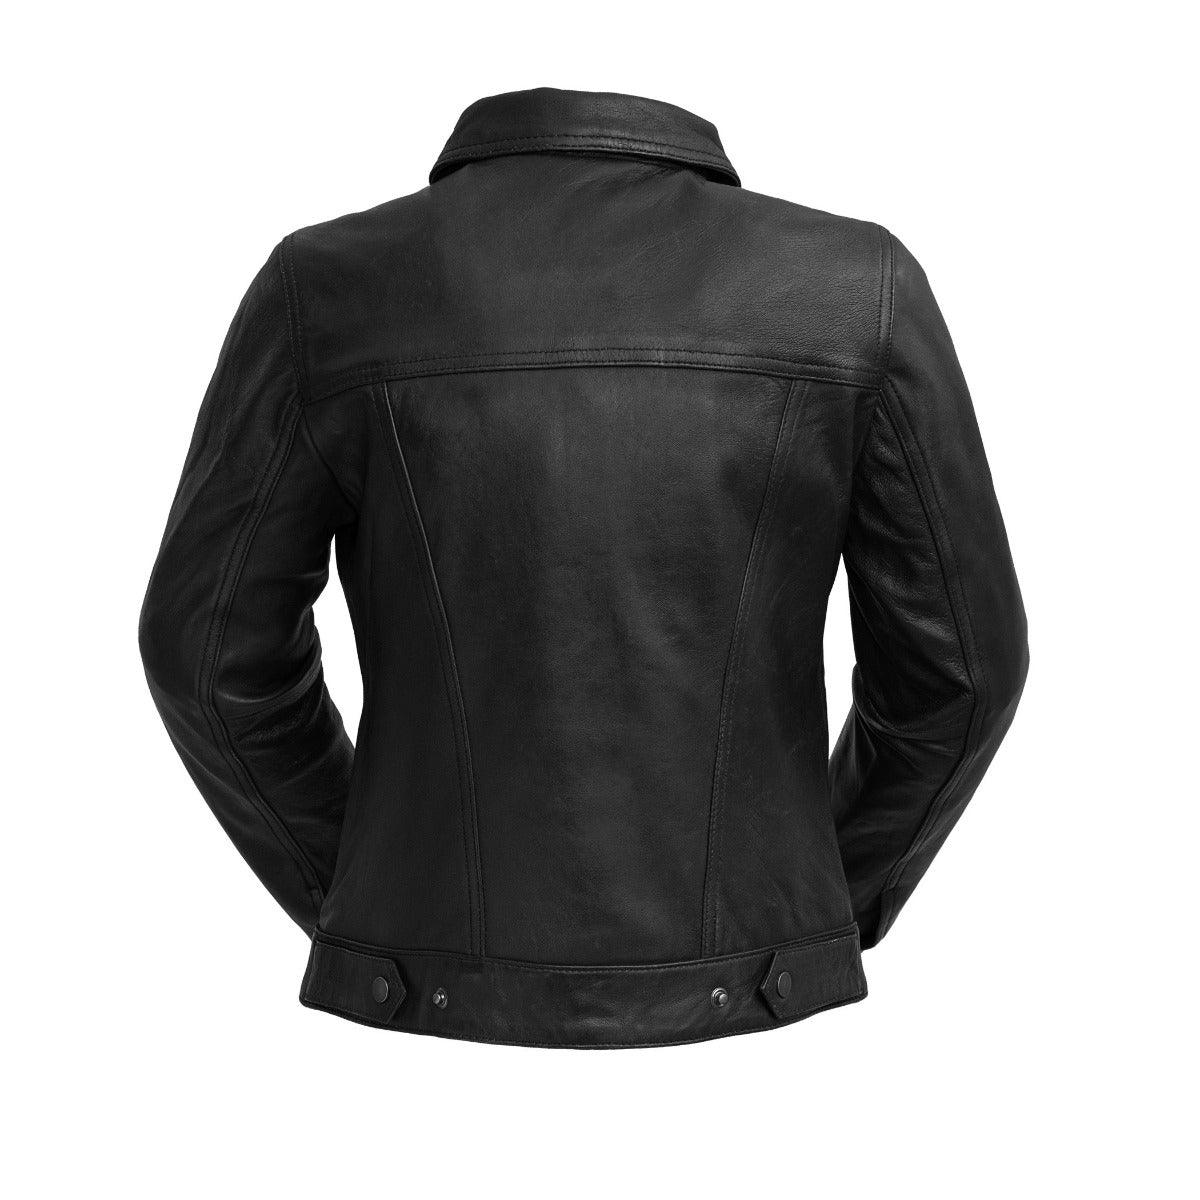 First Manufacturing Madison - Women's Leather Jacket, Black - American Legend Rider